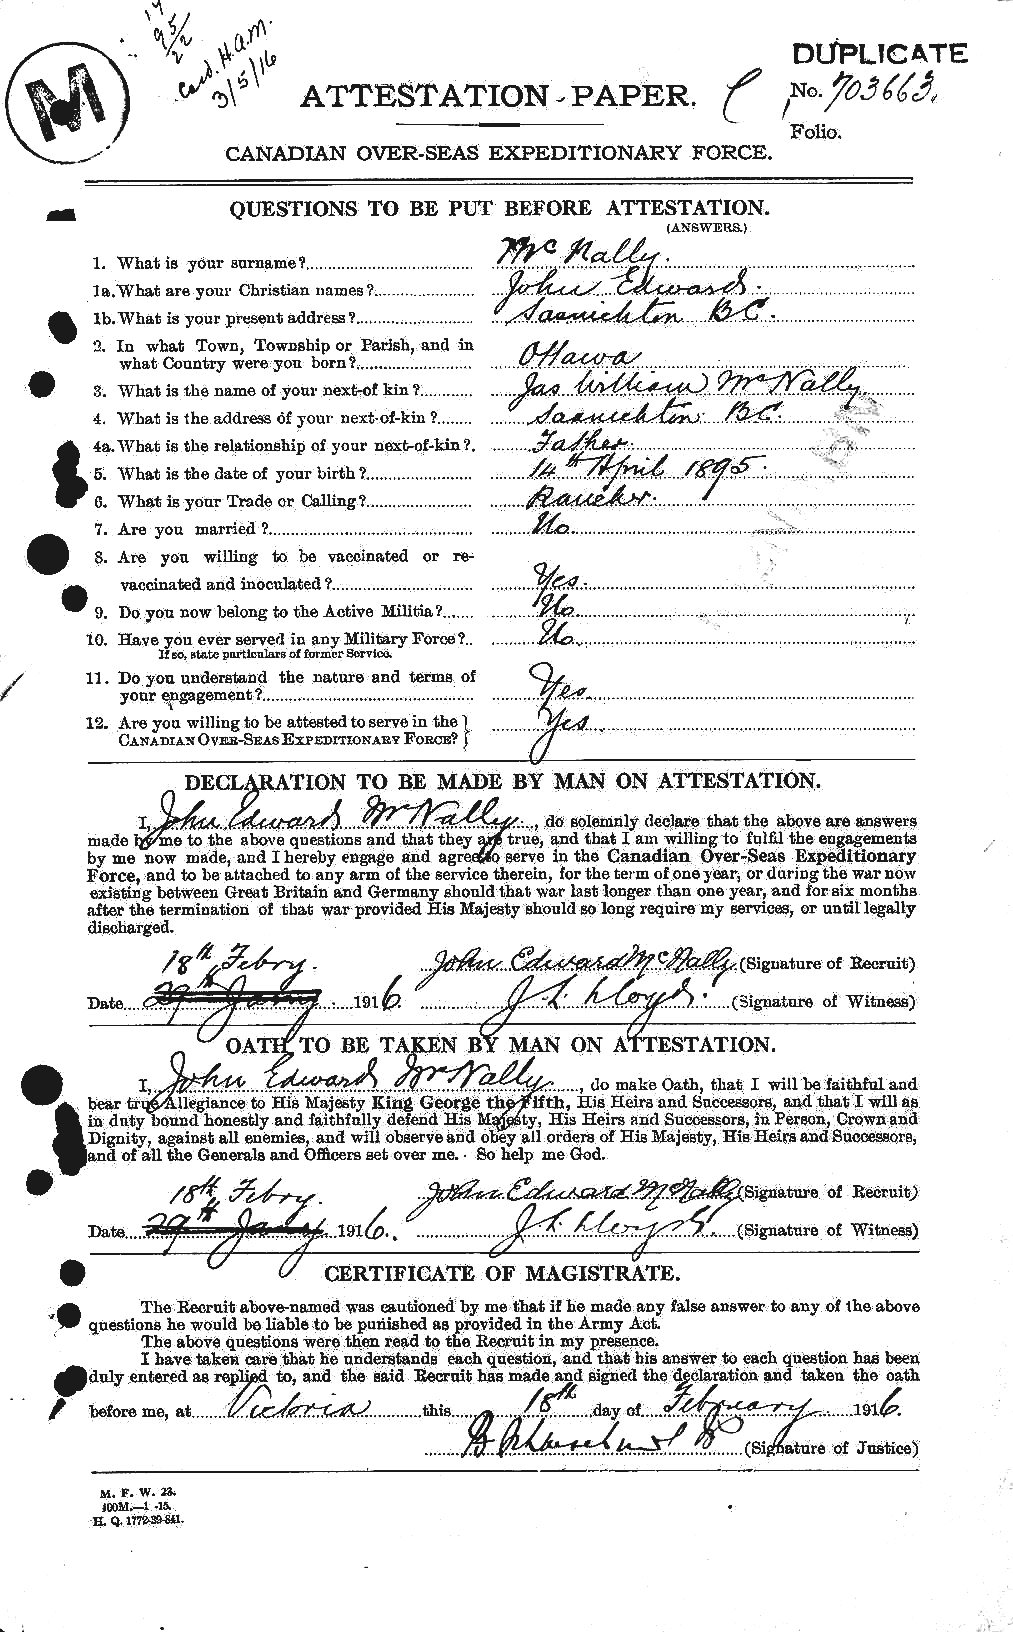 Personnel Records of the First World War - CEF 538157a